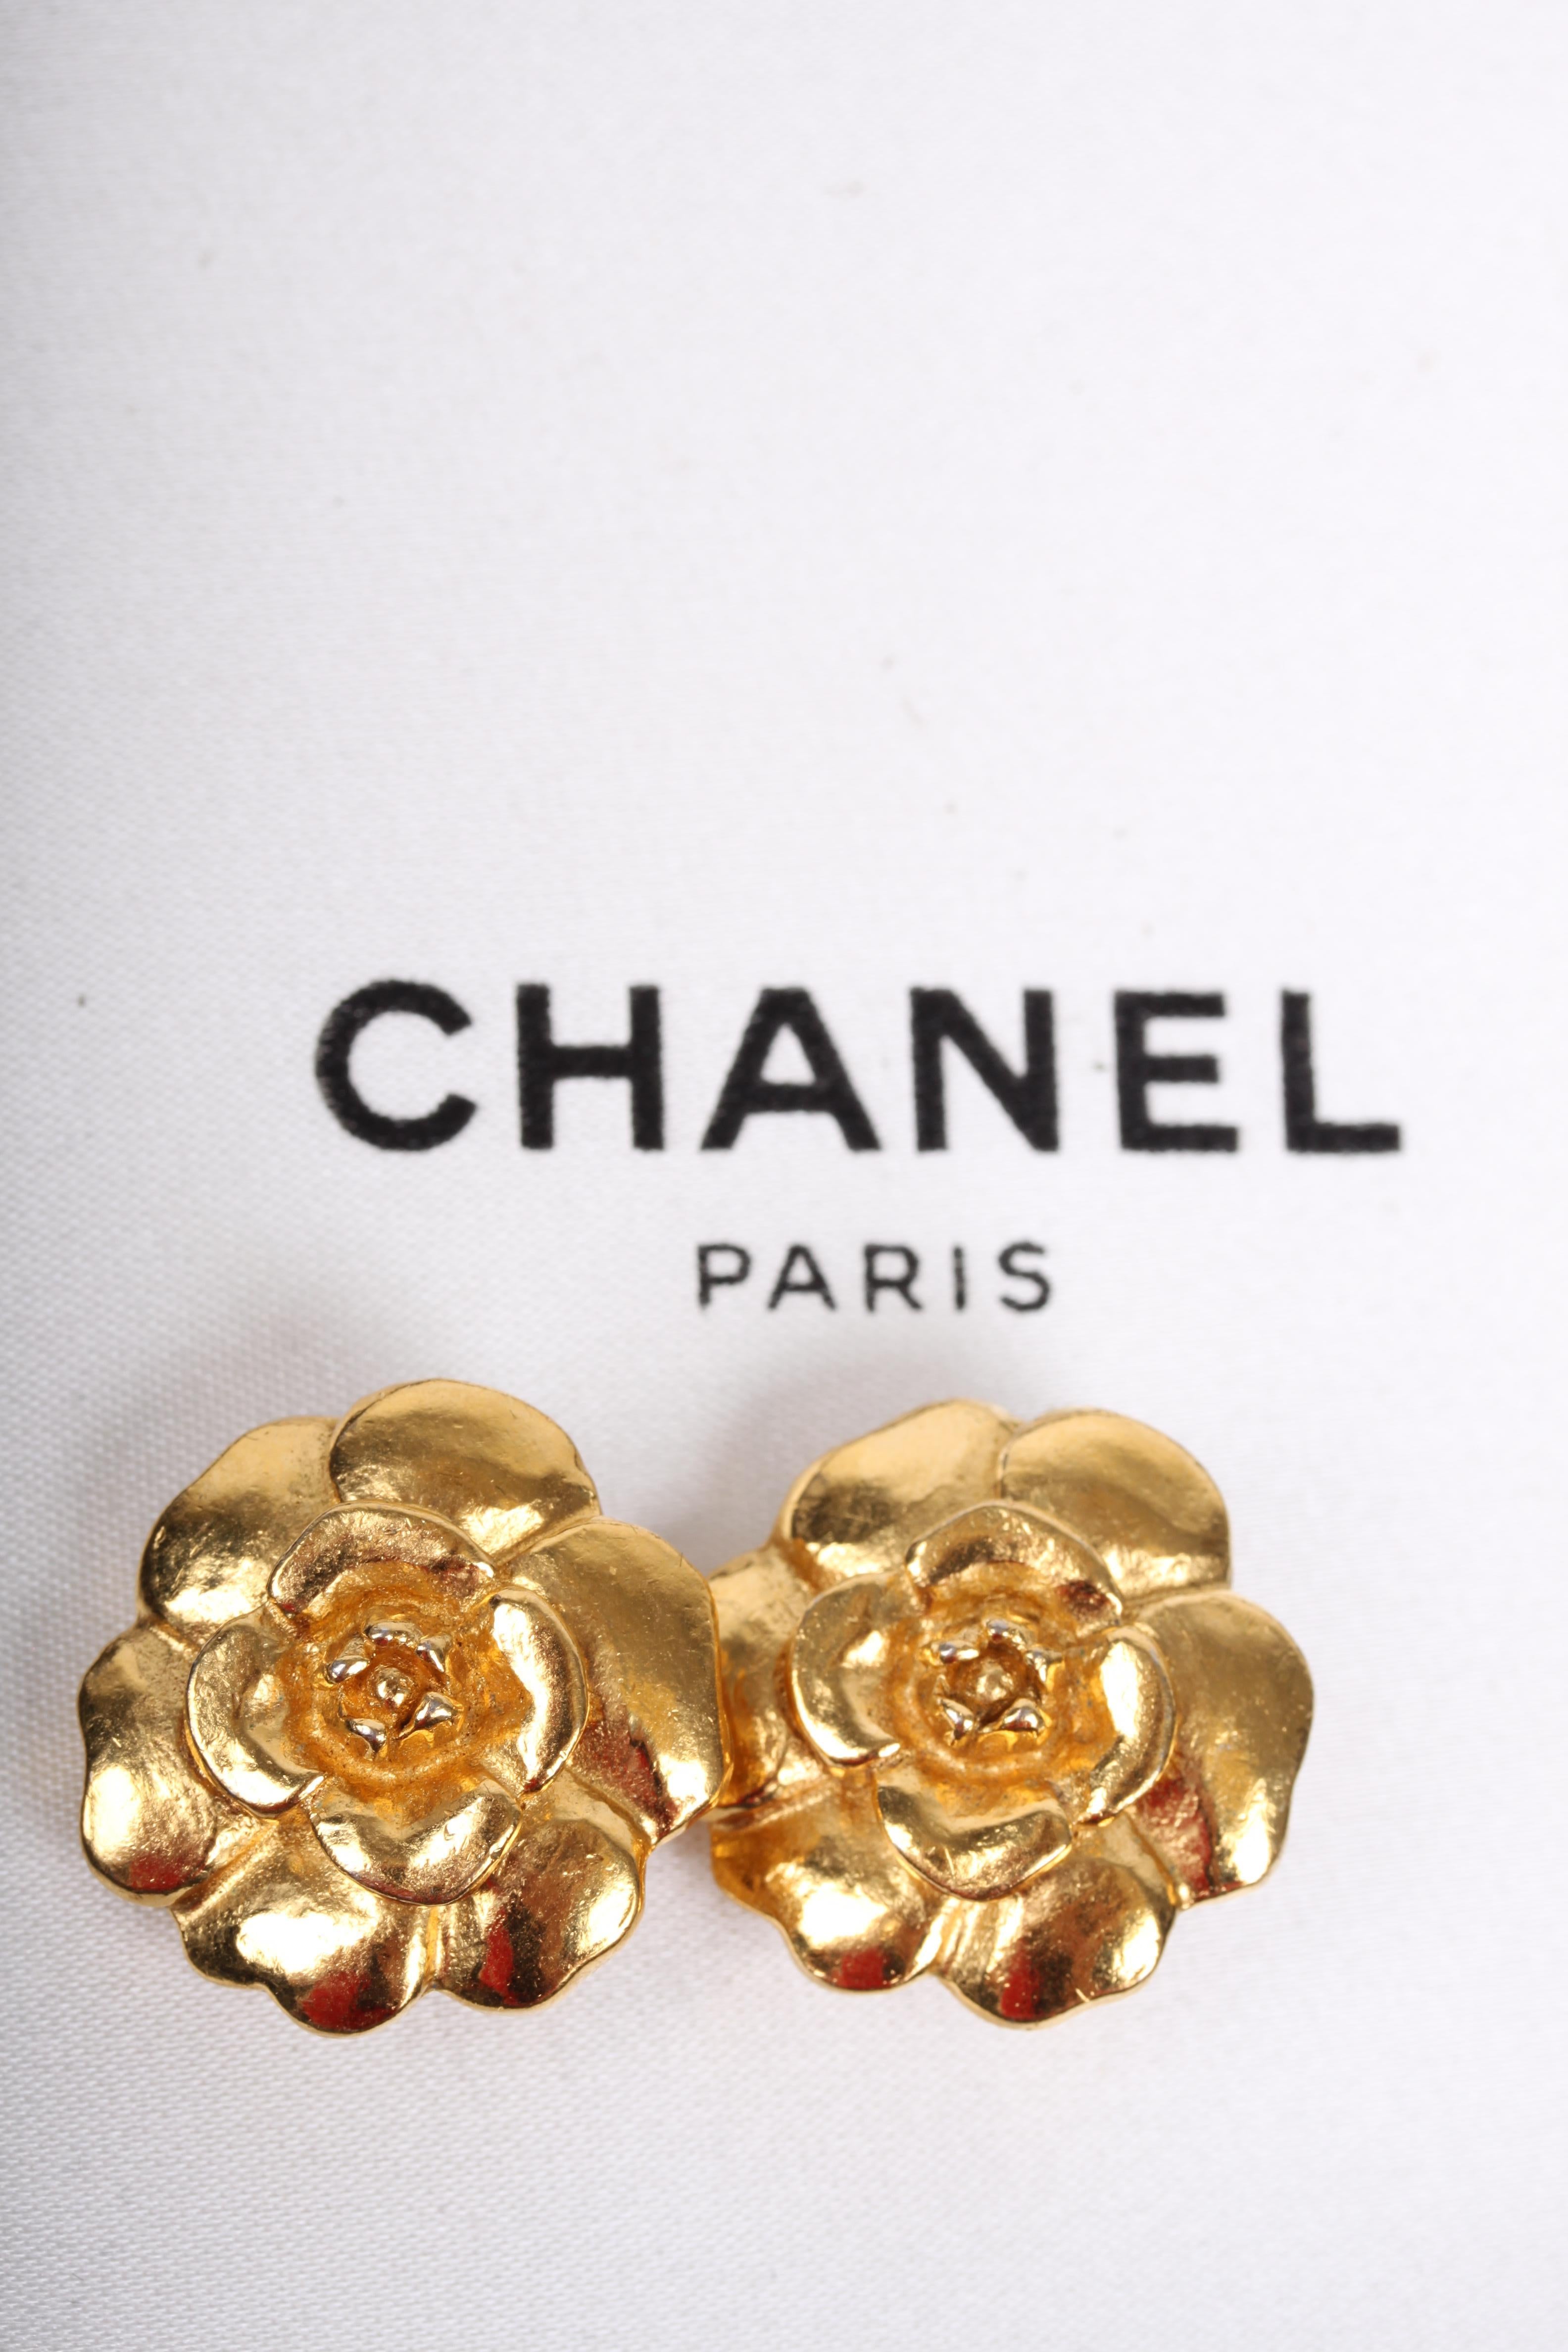 Chanel 3 pc Vintage Camellia Brooch and Earrings Jewelry Set  For Sale 1